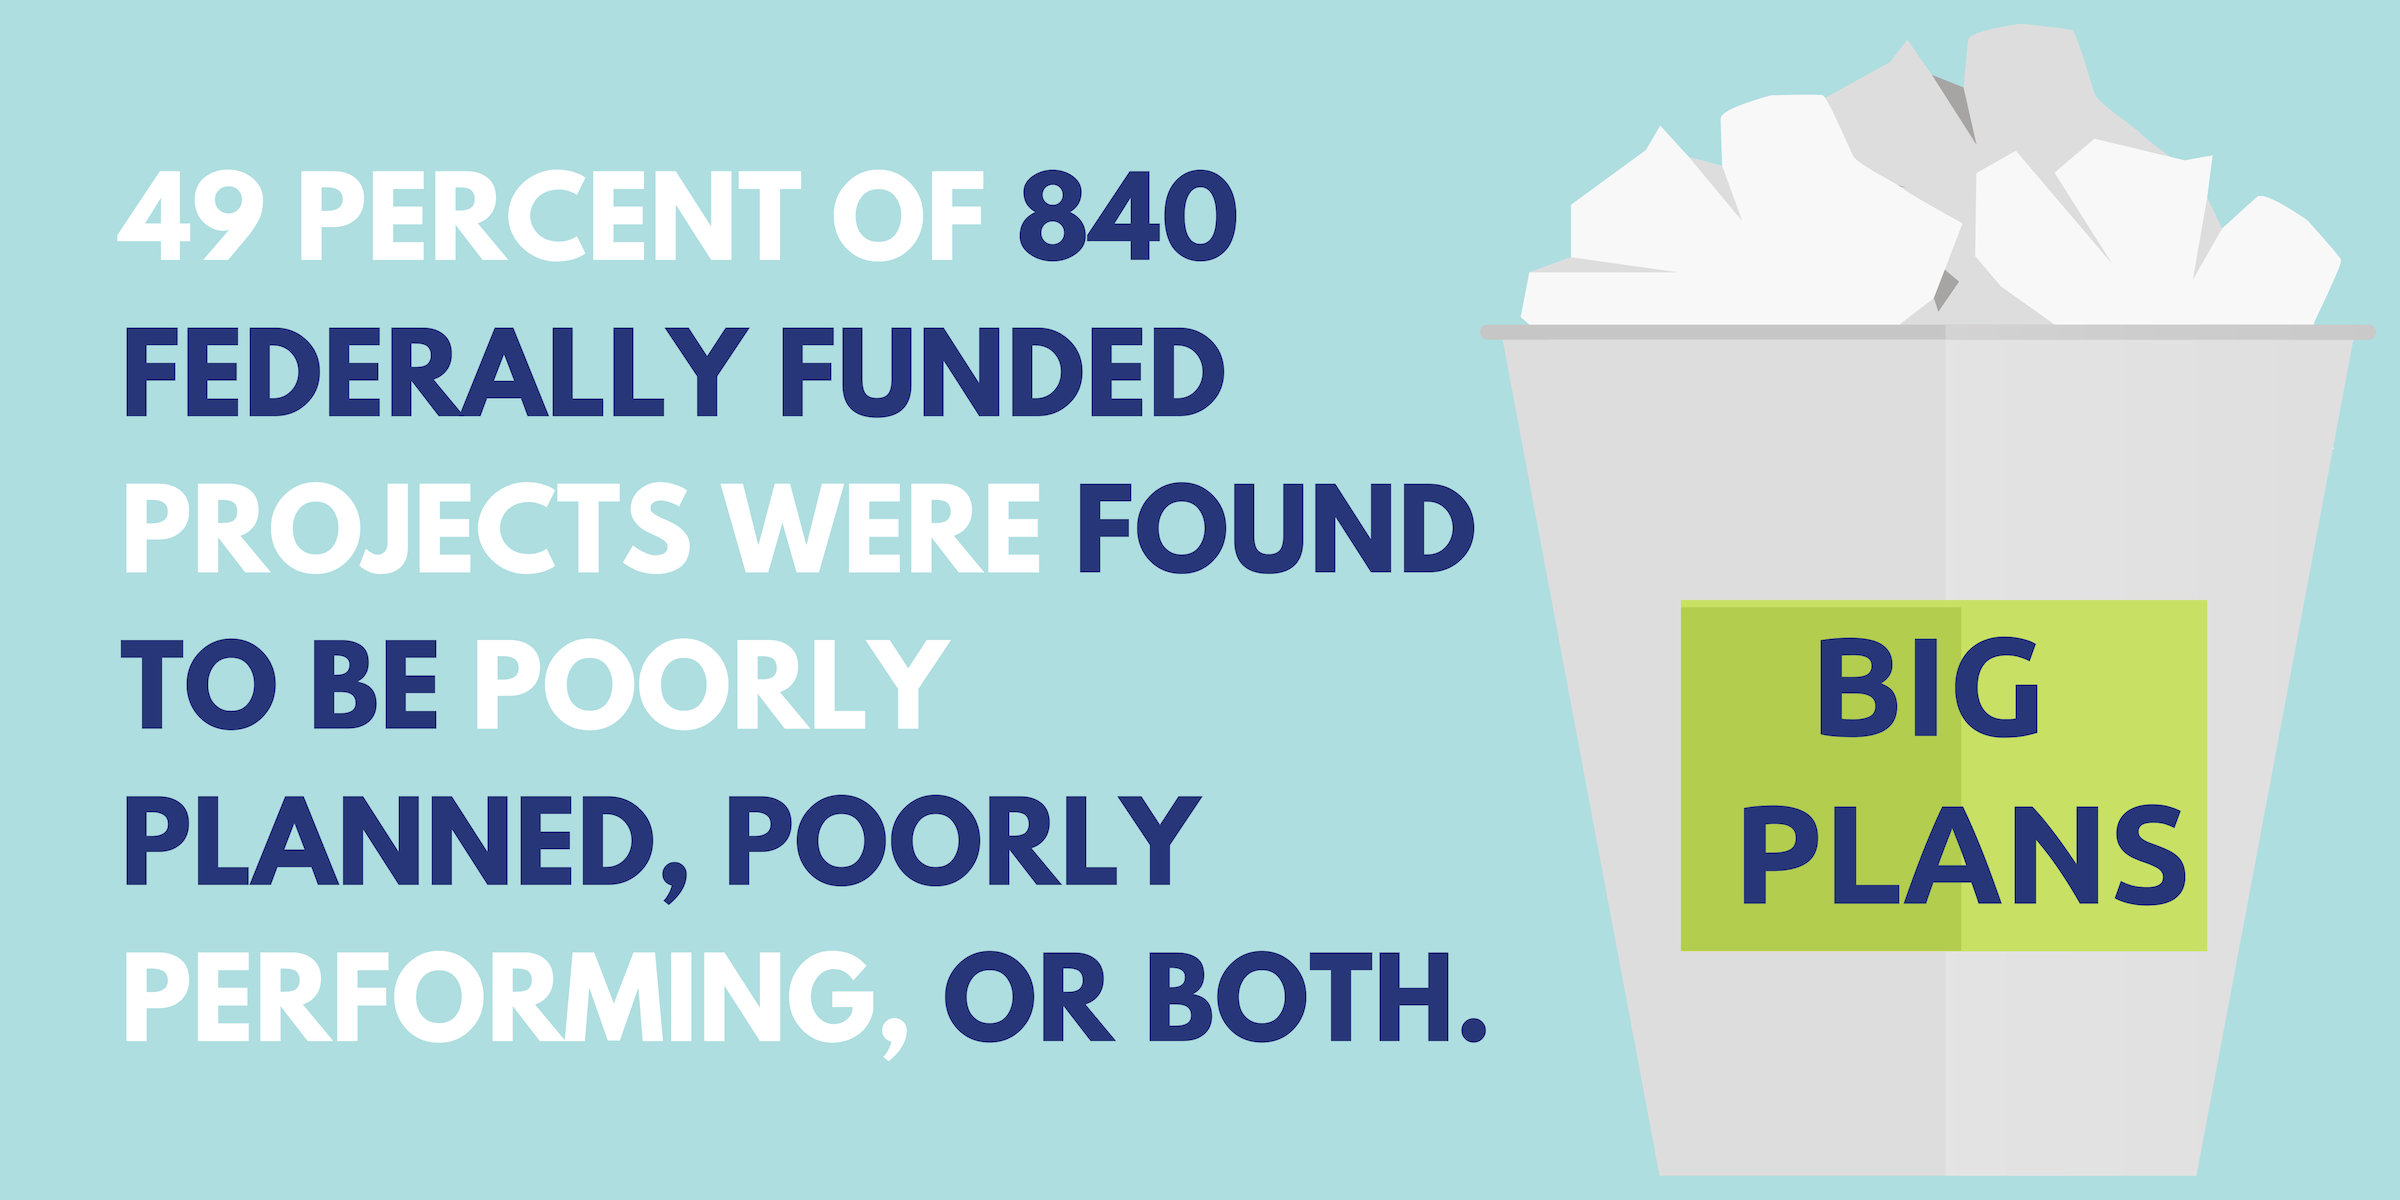 49 percent of 840 federally funded projects were found to be poorly planned, poorly performing, or both.